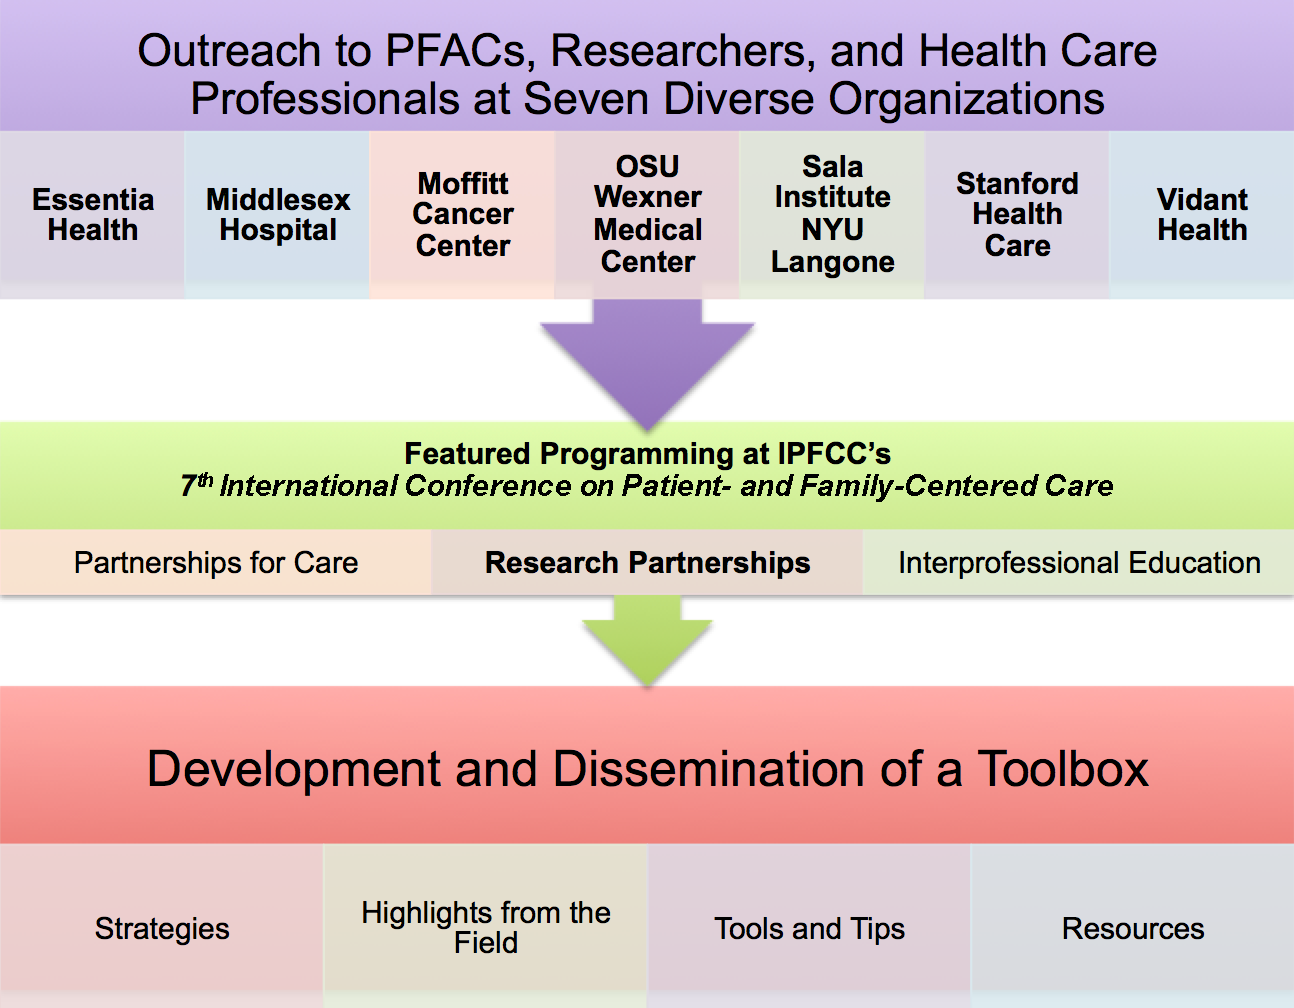 Development and Dissemination of a Toolbox